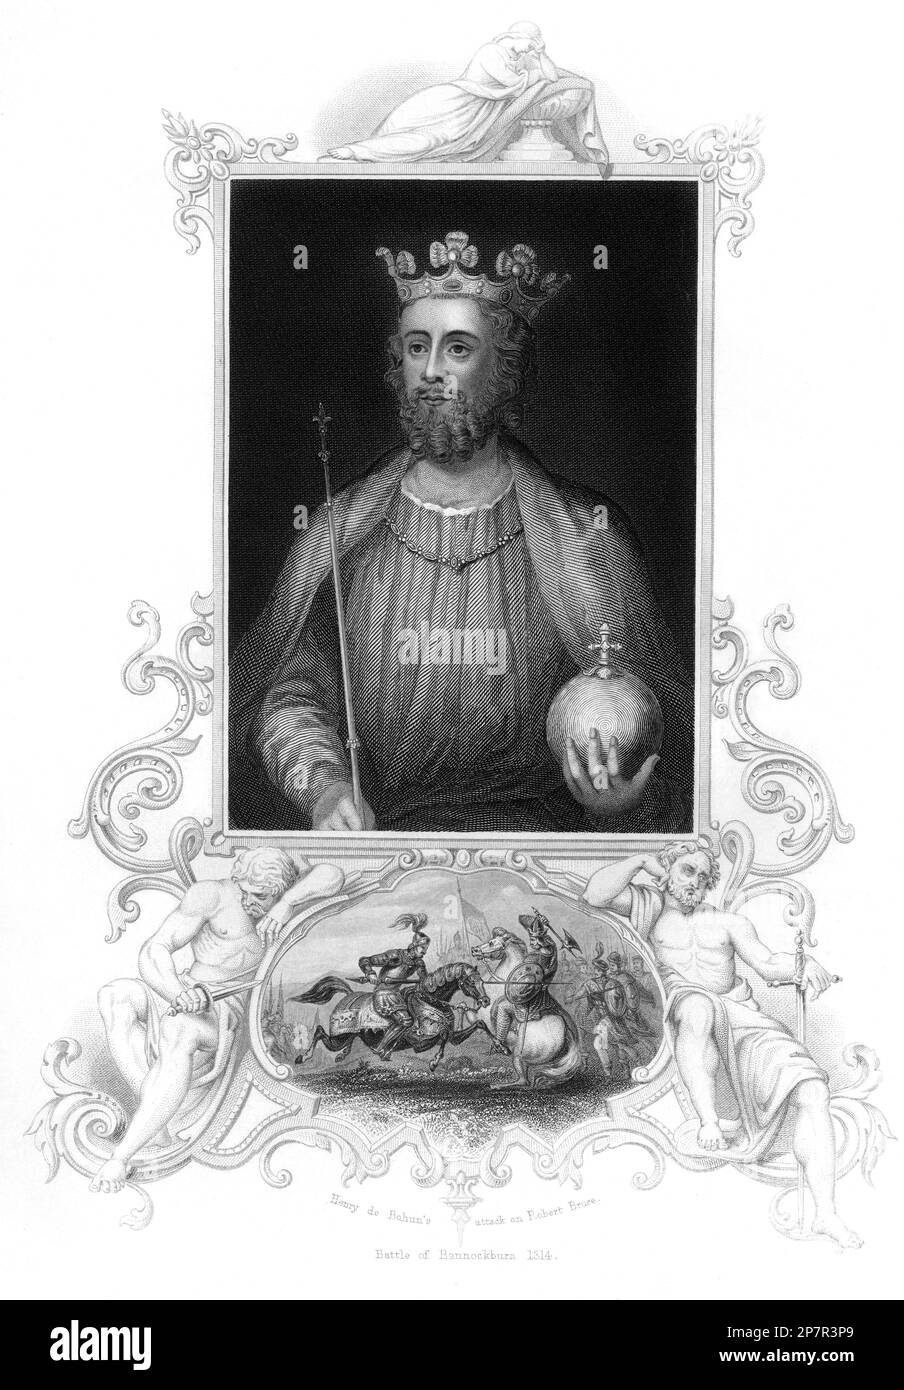 The King of England EDWARD II ( 1284 - 1327 ), portrait from XIX century engraving with the rapresentation of Henry de Bahun 's attack on Robert Bruce , battle of Bannochburn 1314 . was King of England from 1307 until deposed in January, 1327.  He is today perhaps best remembered for a story about his alleged murder, which was linked to his reliance on the corrupt family of Hugh le Despenser, which has been seen by evidence of his homosexuality . Lover of Piers Gaveston . The story  inxpire a play by Christopher Marlowe , first acted in 1592 c. -  RE - REALI - ROYALTY - nobili - nobiltà  - ING Stock Photo